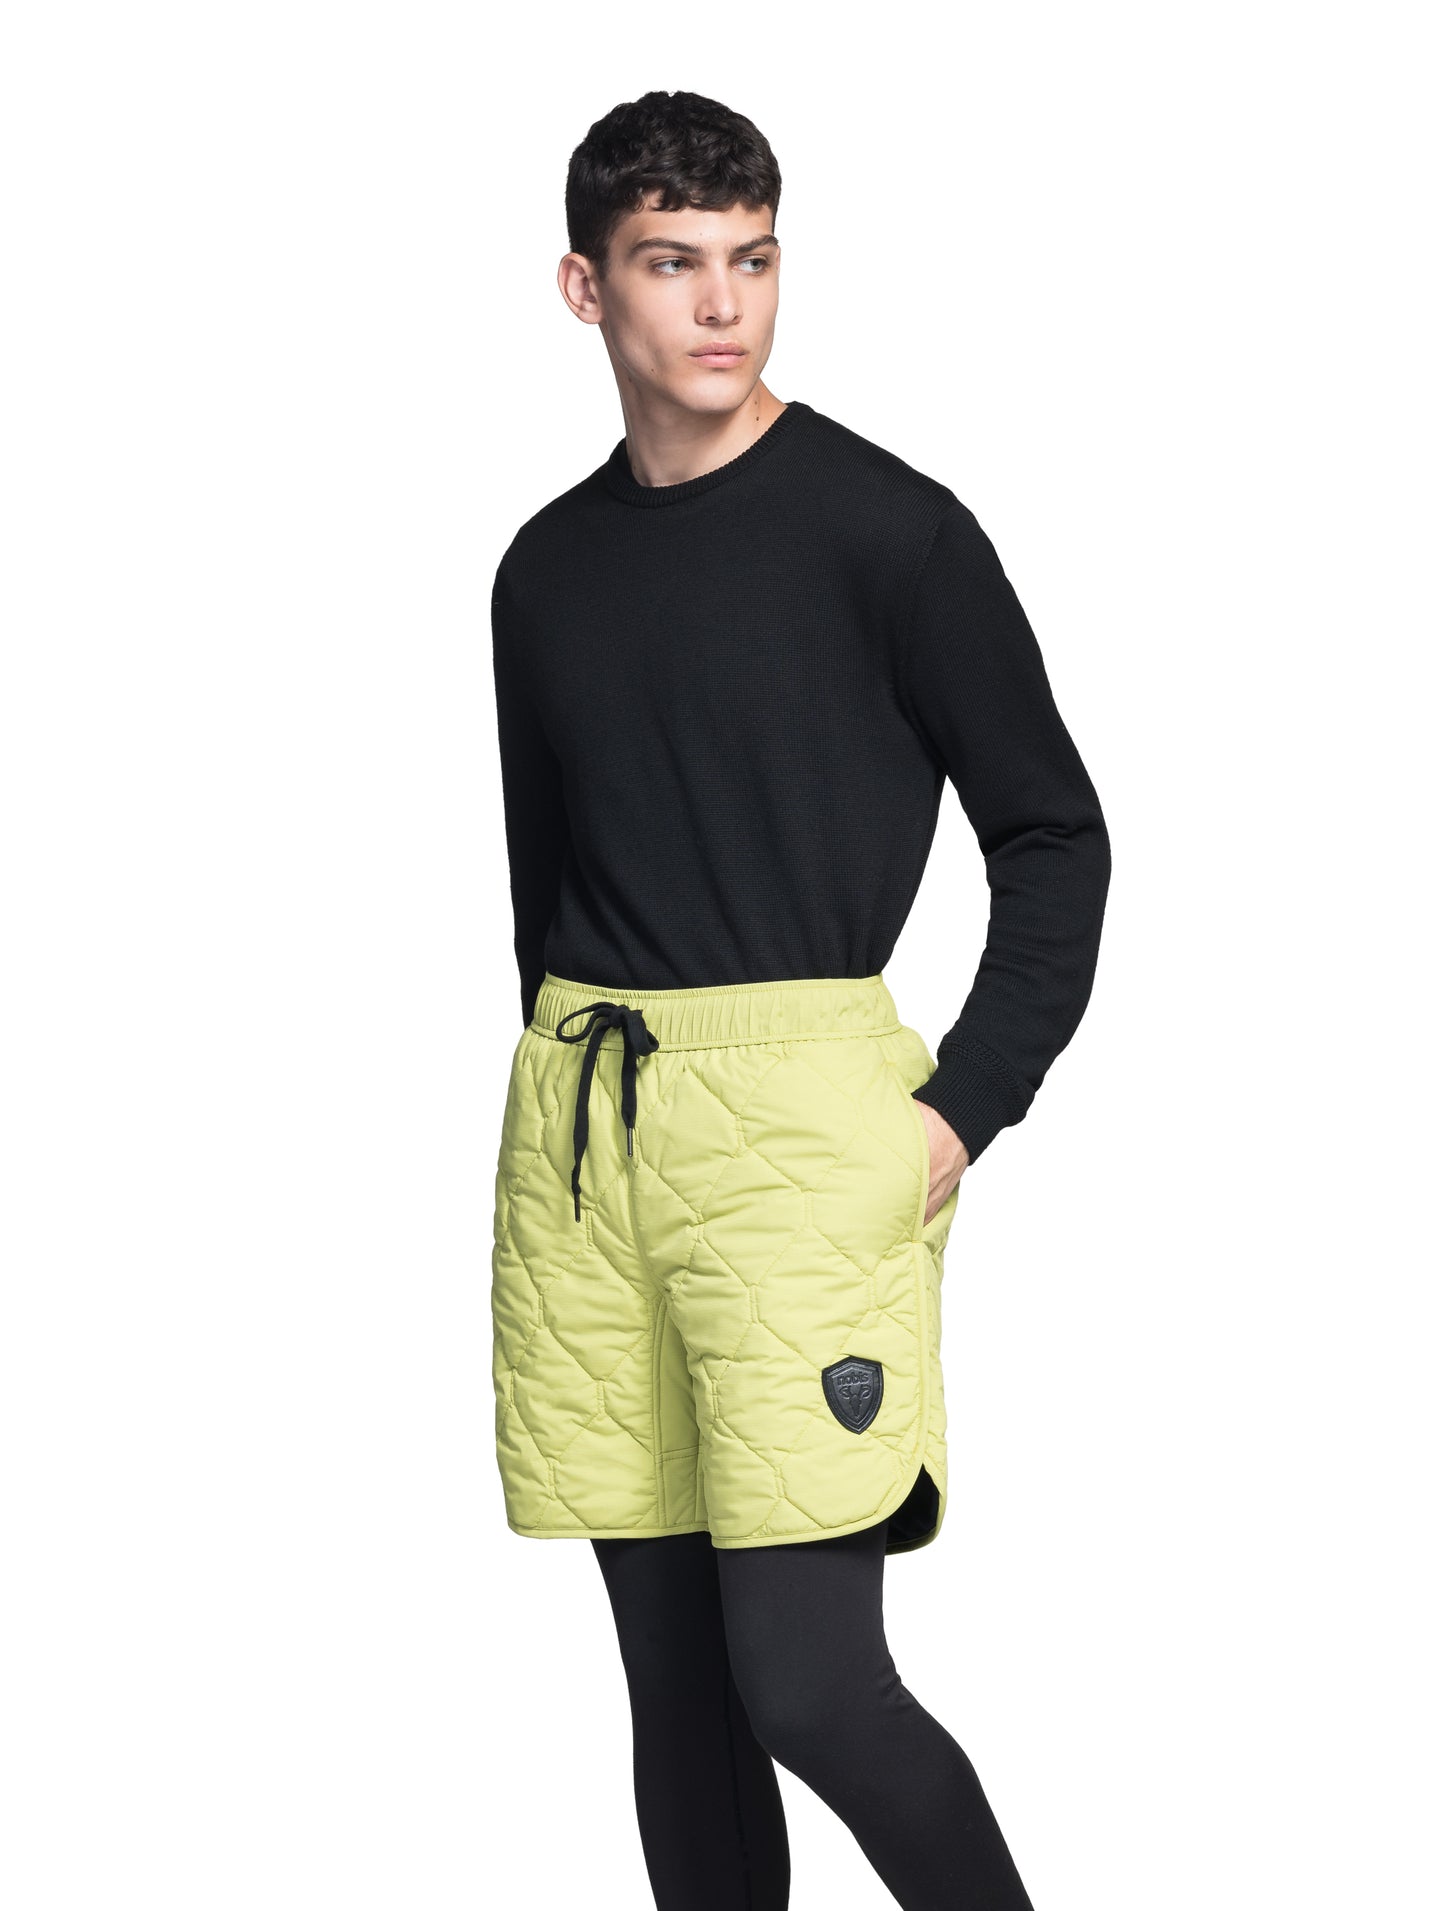 Curt Men's Performance Quilted Shorts at knee length, premium stretch nylon and stretch ripstop fabricaiton, premium 4-way stretch, water resistant Primaloft Gold Insulation Active+, side seam pockets, exteriror back pocket, elasticized waist with drawcords, and notch detailing at side seams, in Dark Citron